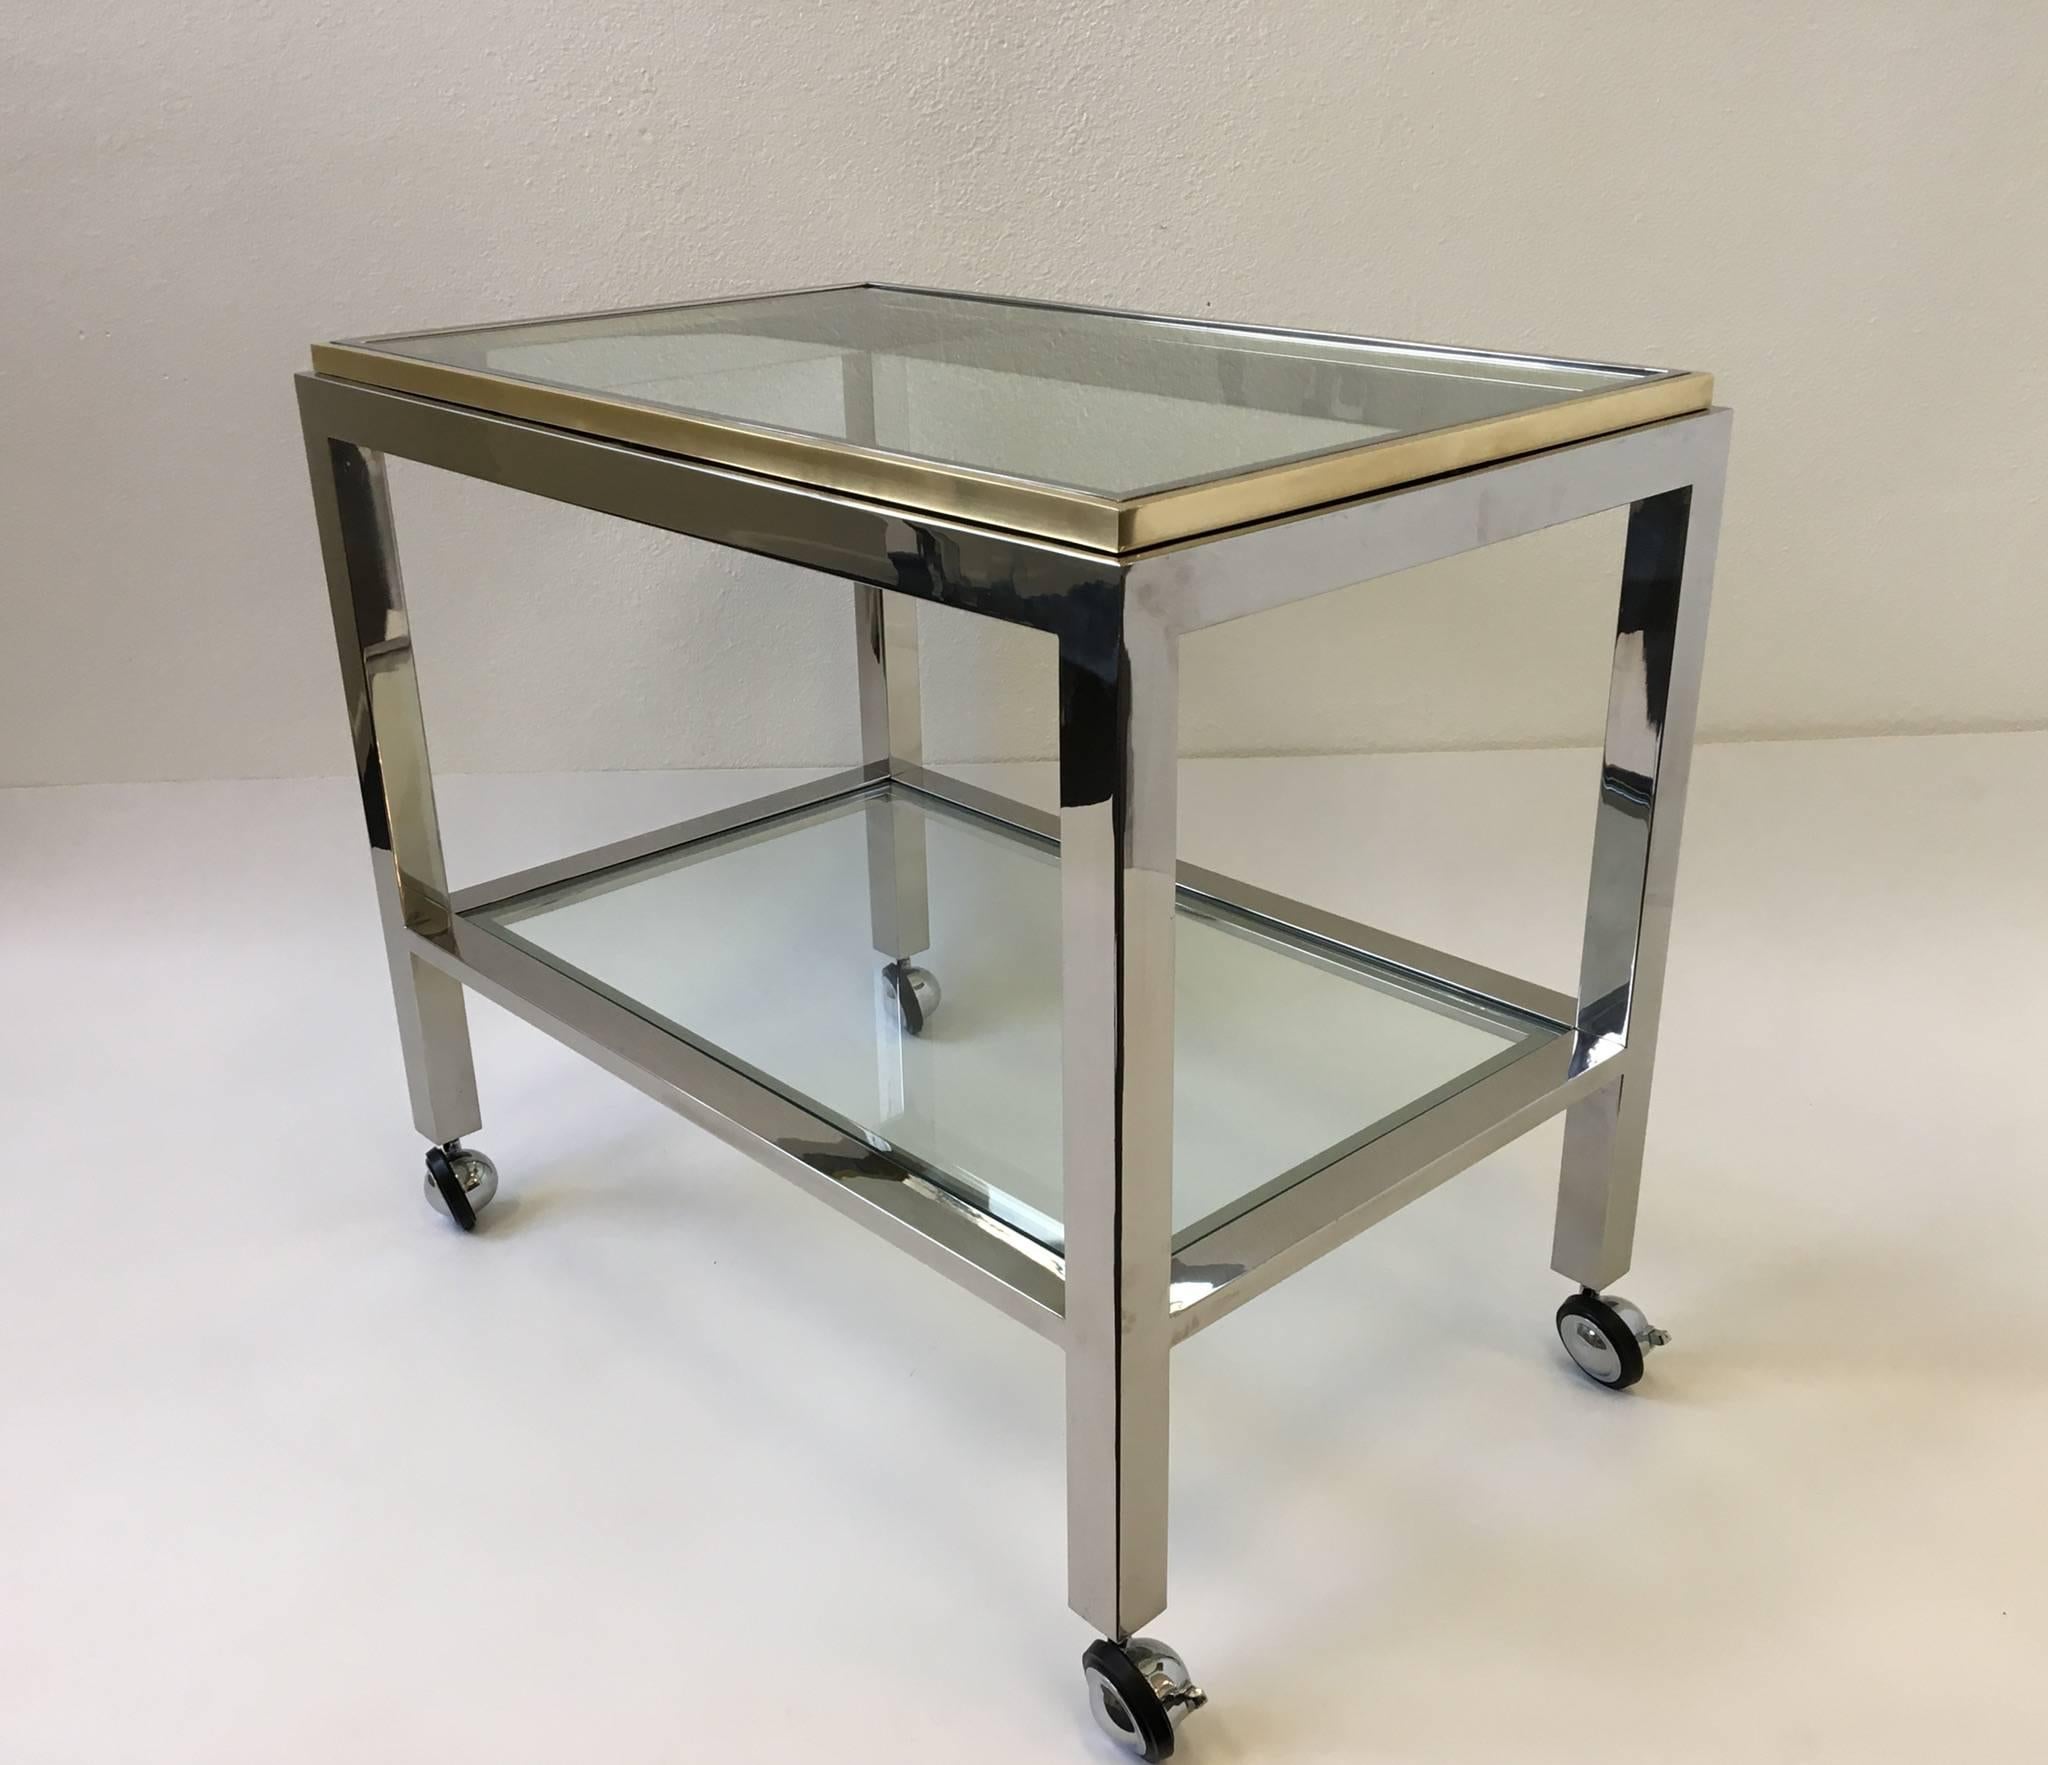 A glamorous polished chrome and brass with glass inserts Italian bar cart designed in the 1970s by Renato Zevi for Zevi & C. 
Dimension: 27.5